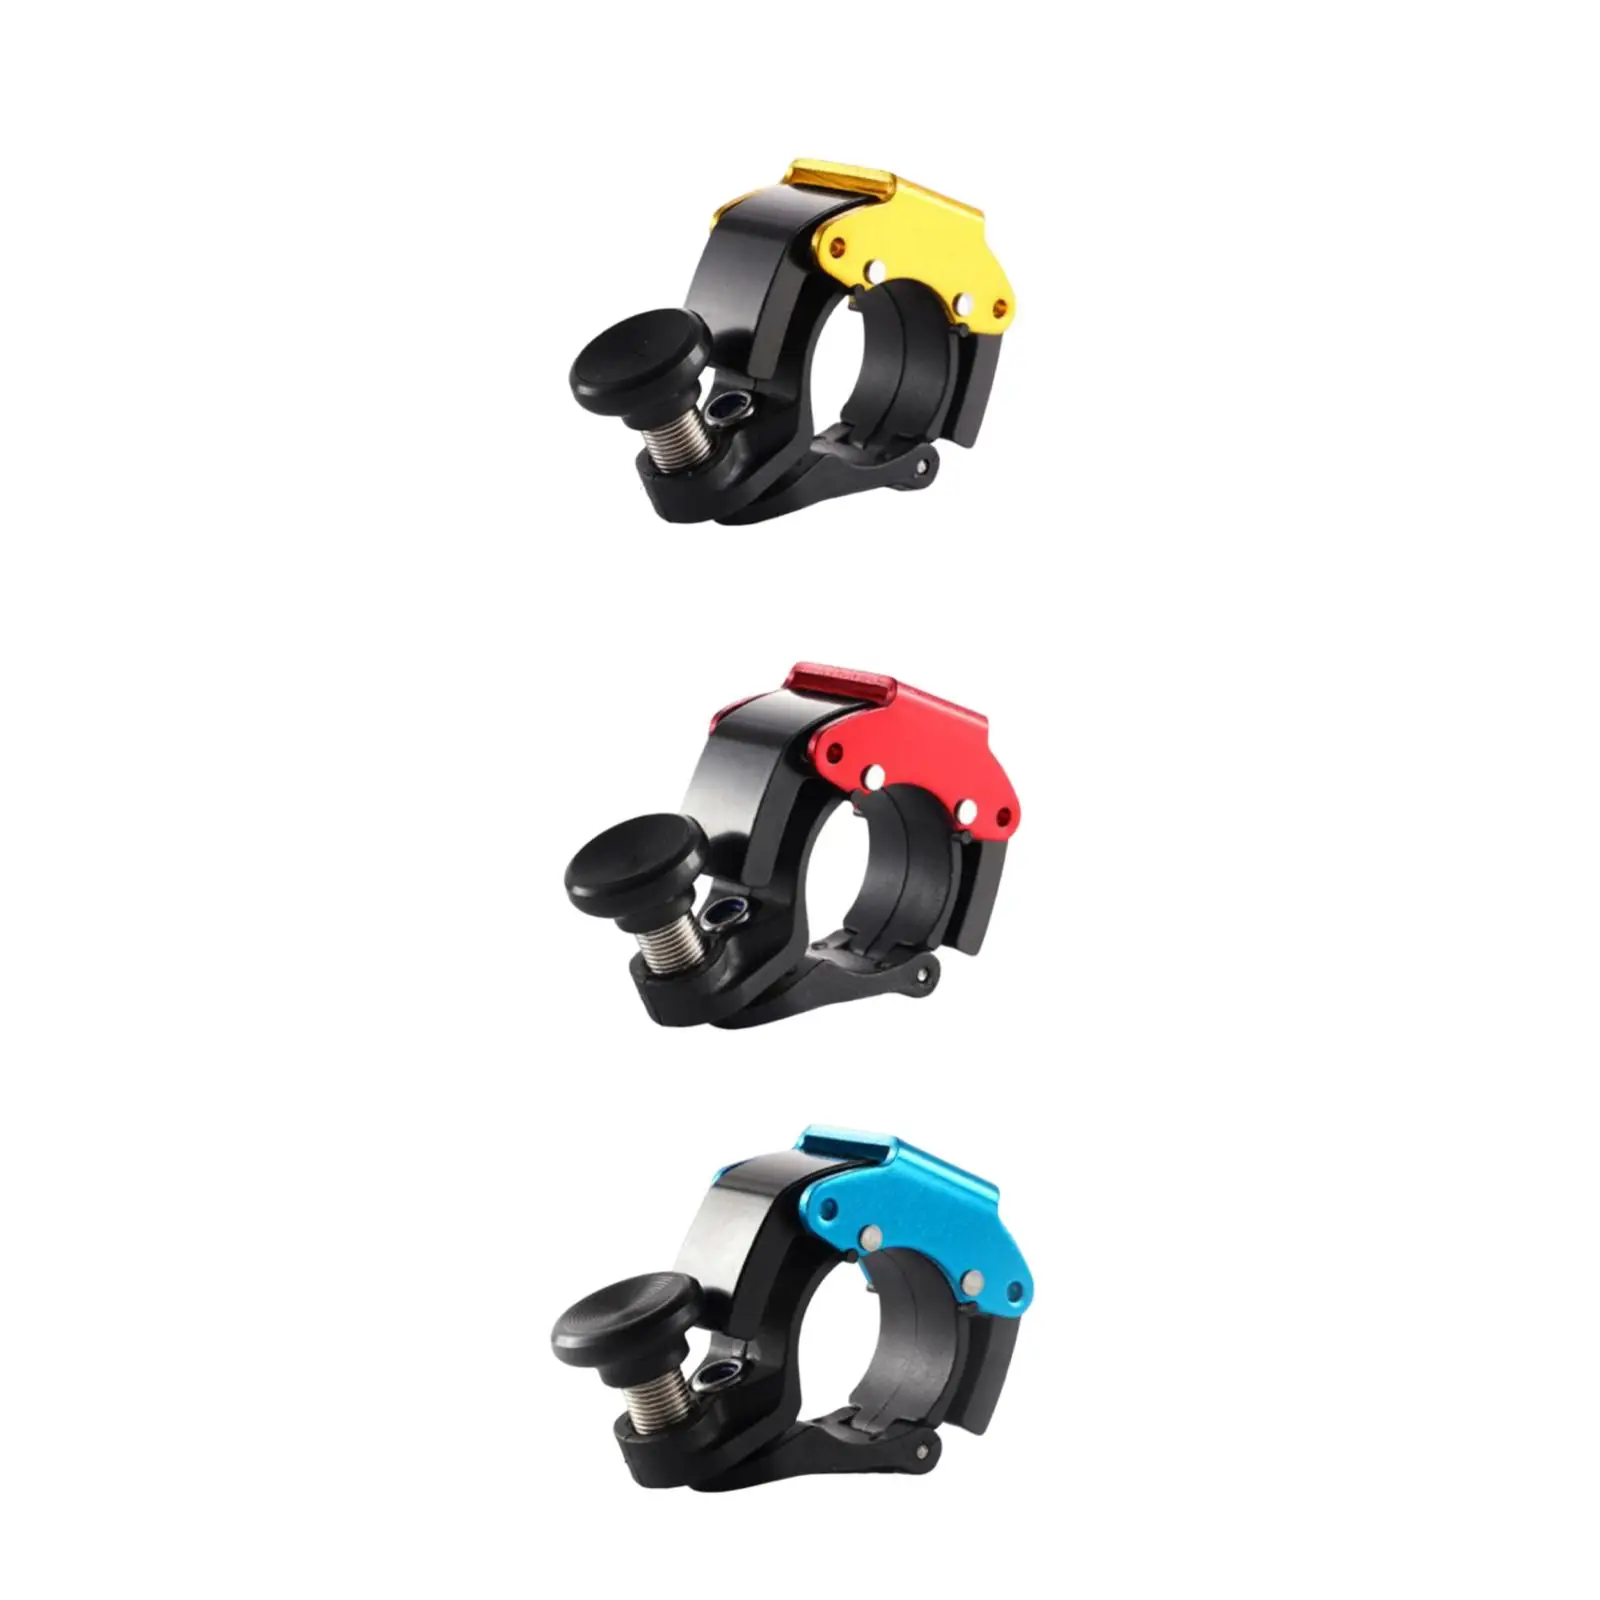 Bike Bells Invisible Cycling Bells Clear Loud Sound Bicycle Handlebar Bell Bicycle Bells for Folding Bike Cycling Mountain Bike